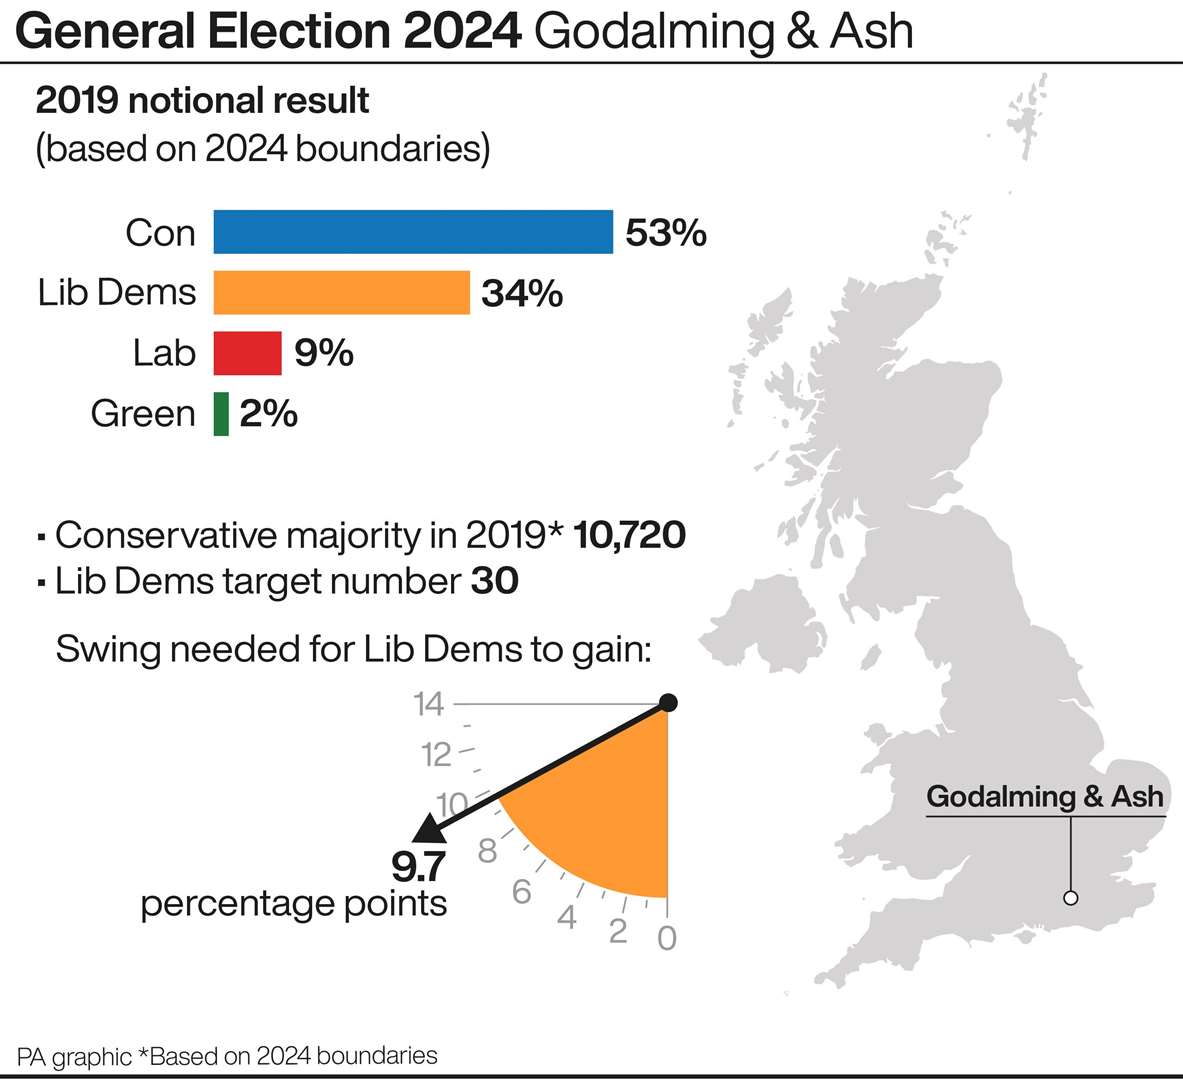 A profile of the Godalming & Ash constituency (PA Graphics)